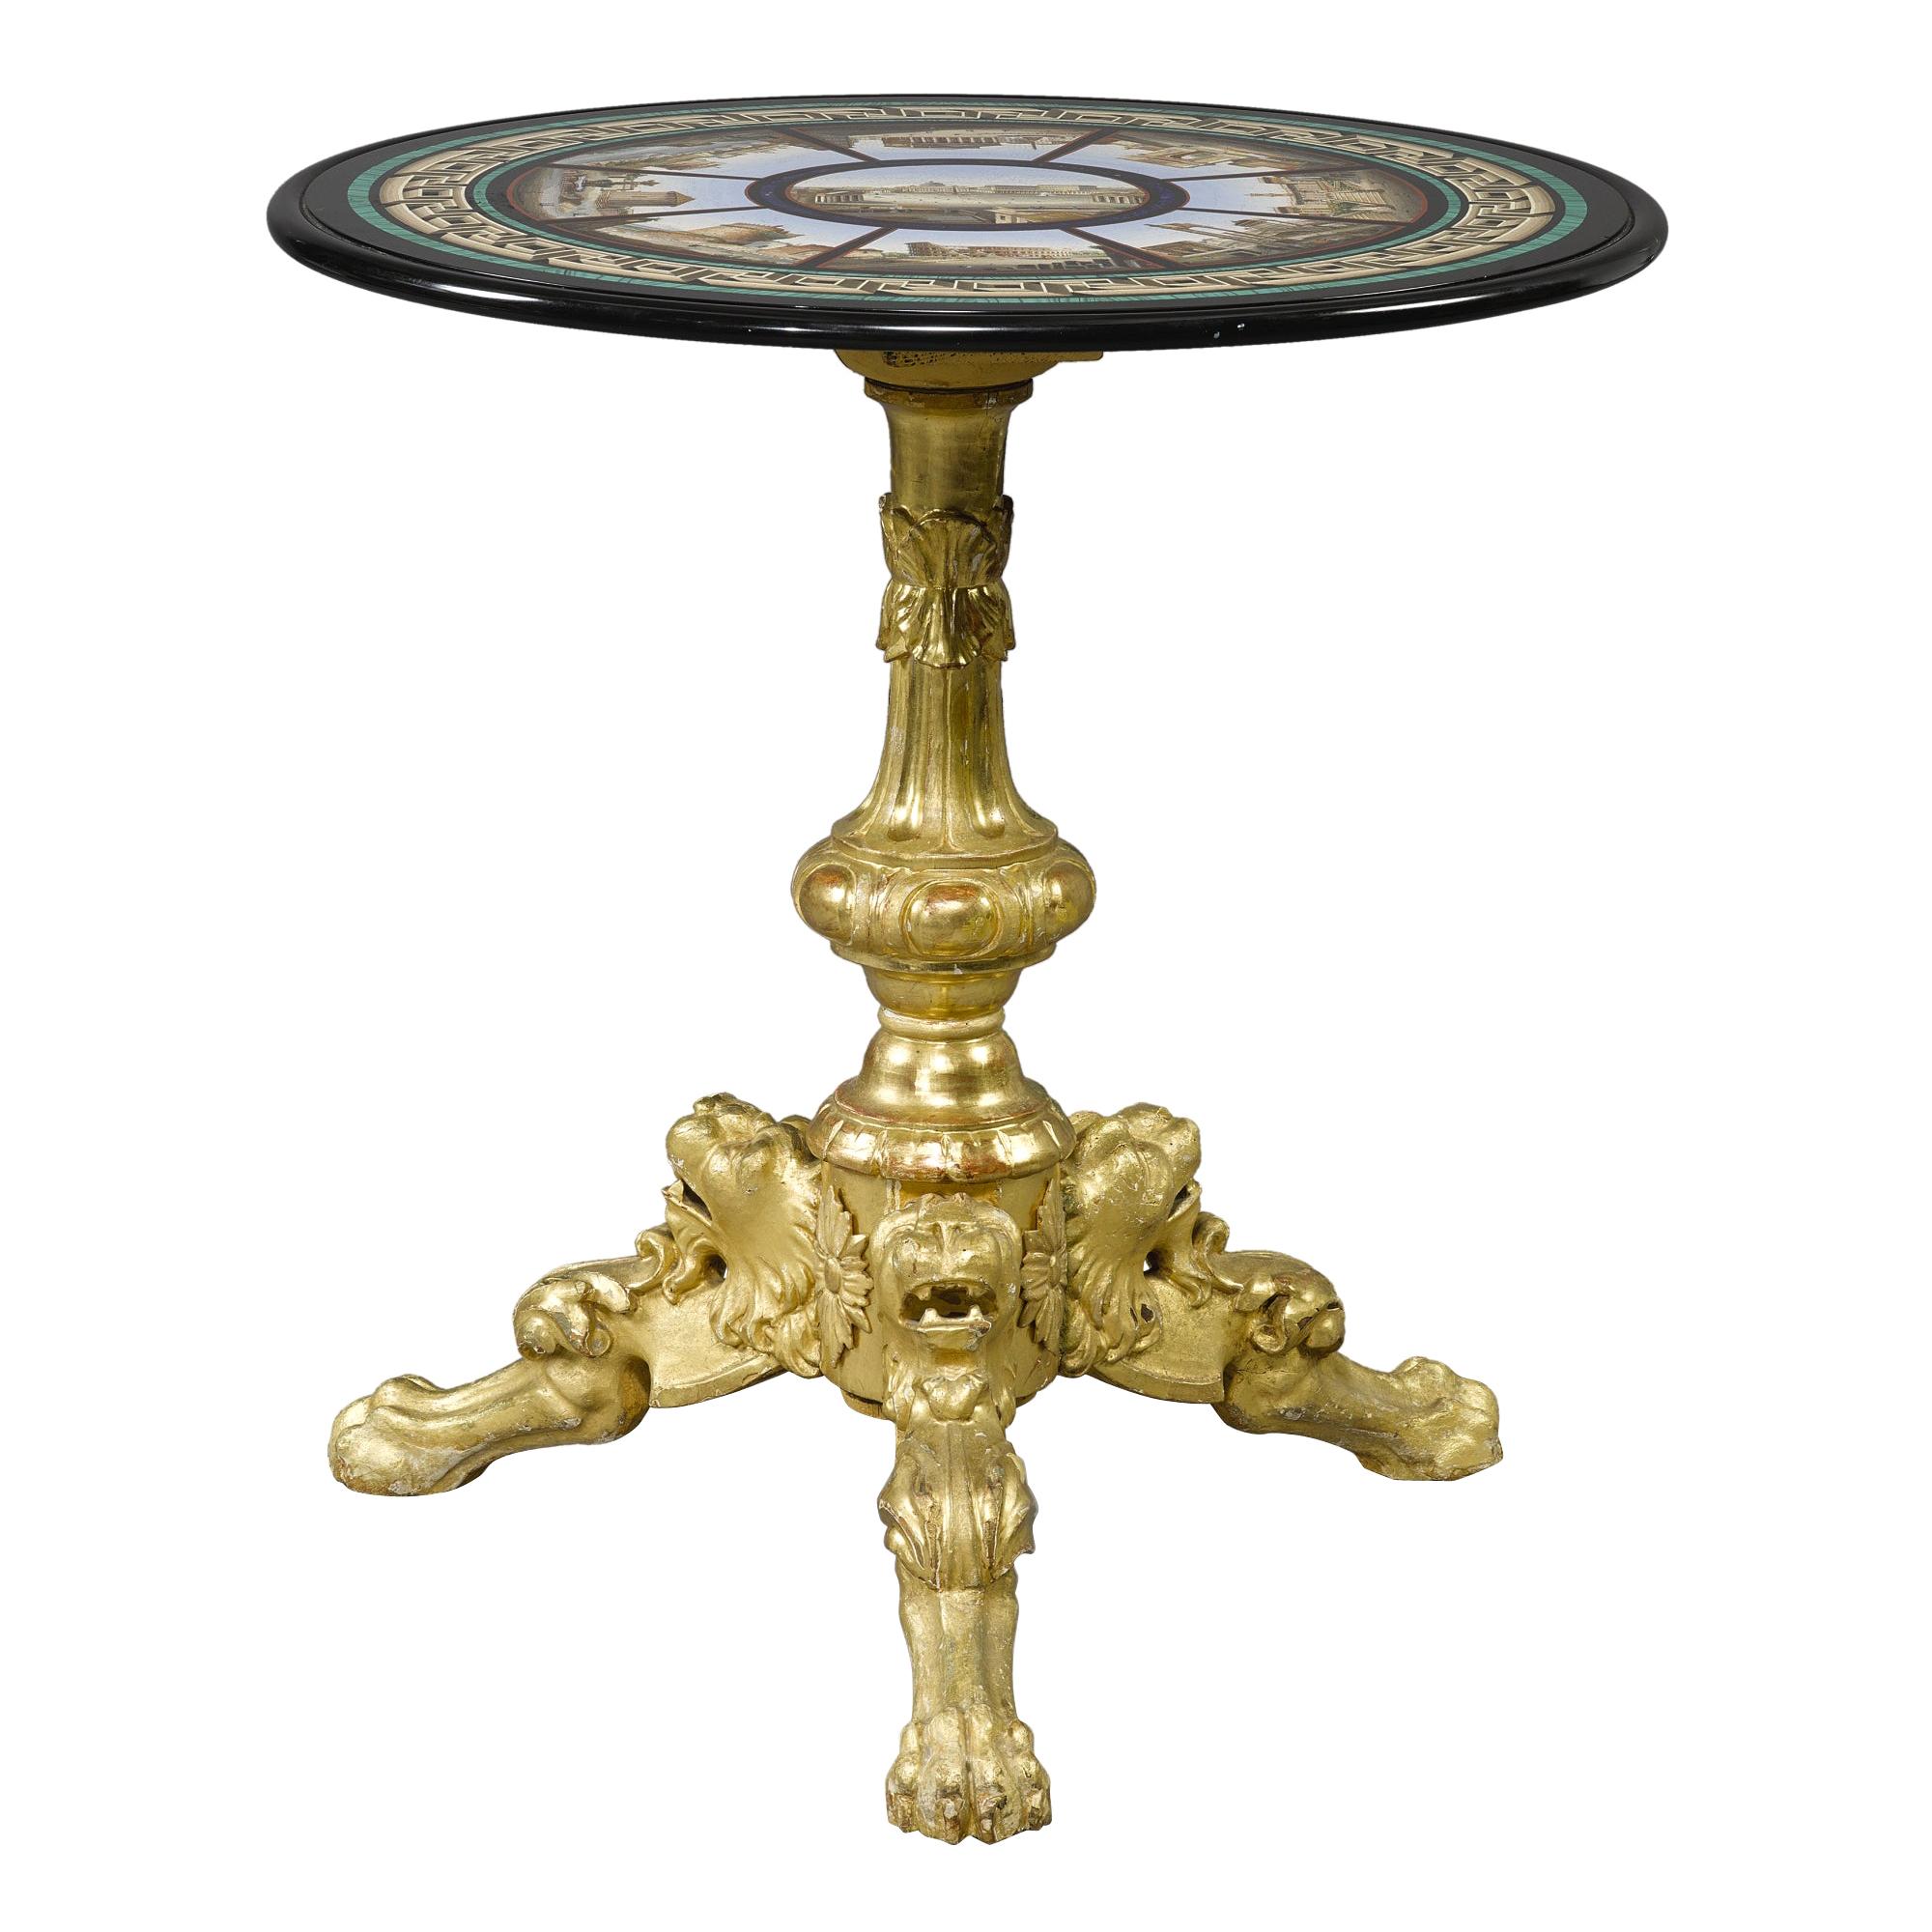 An Important and Rare Italian micromosaic table by Cesare Roccheggiani on a giltwood tripod base, Rome, last quarter 19th century.
The central panel depicting St. Peter's Square surrounded by eight views of Roman monuments within lapis lazuli,